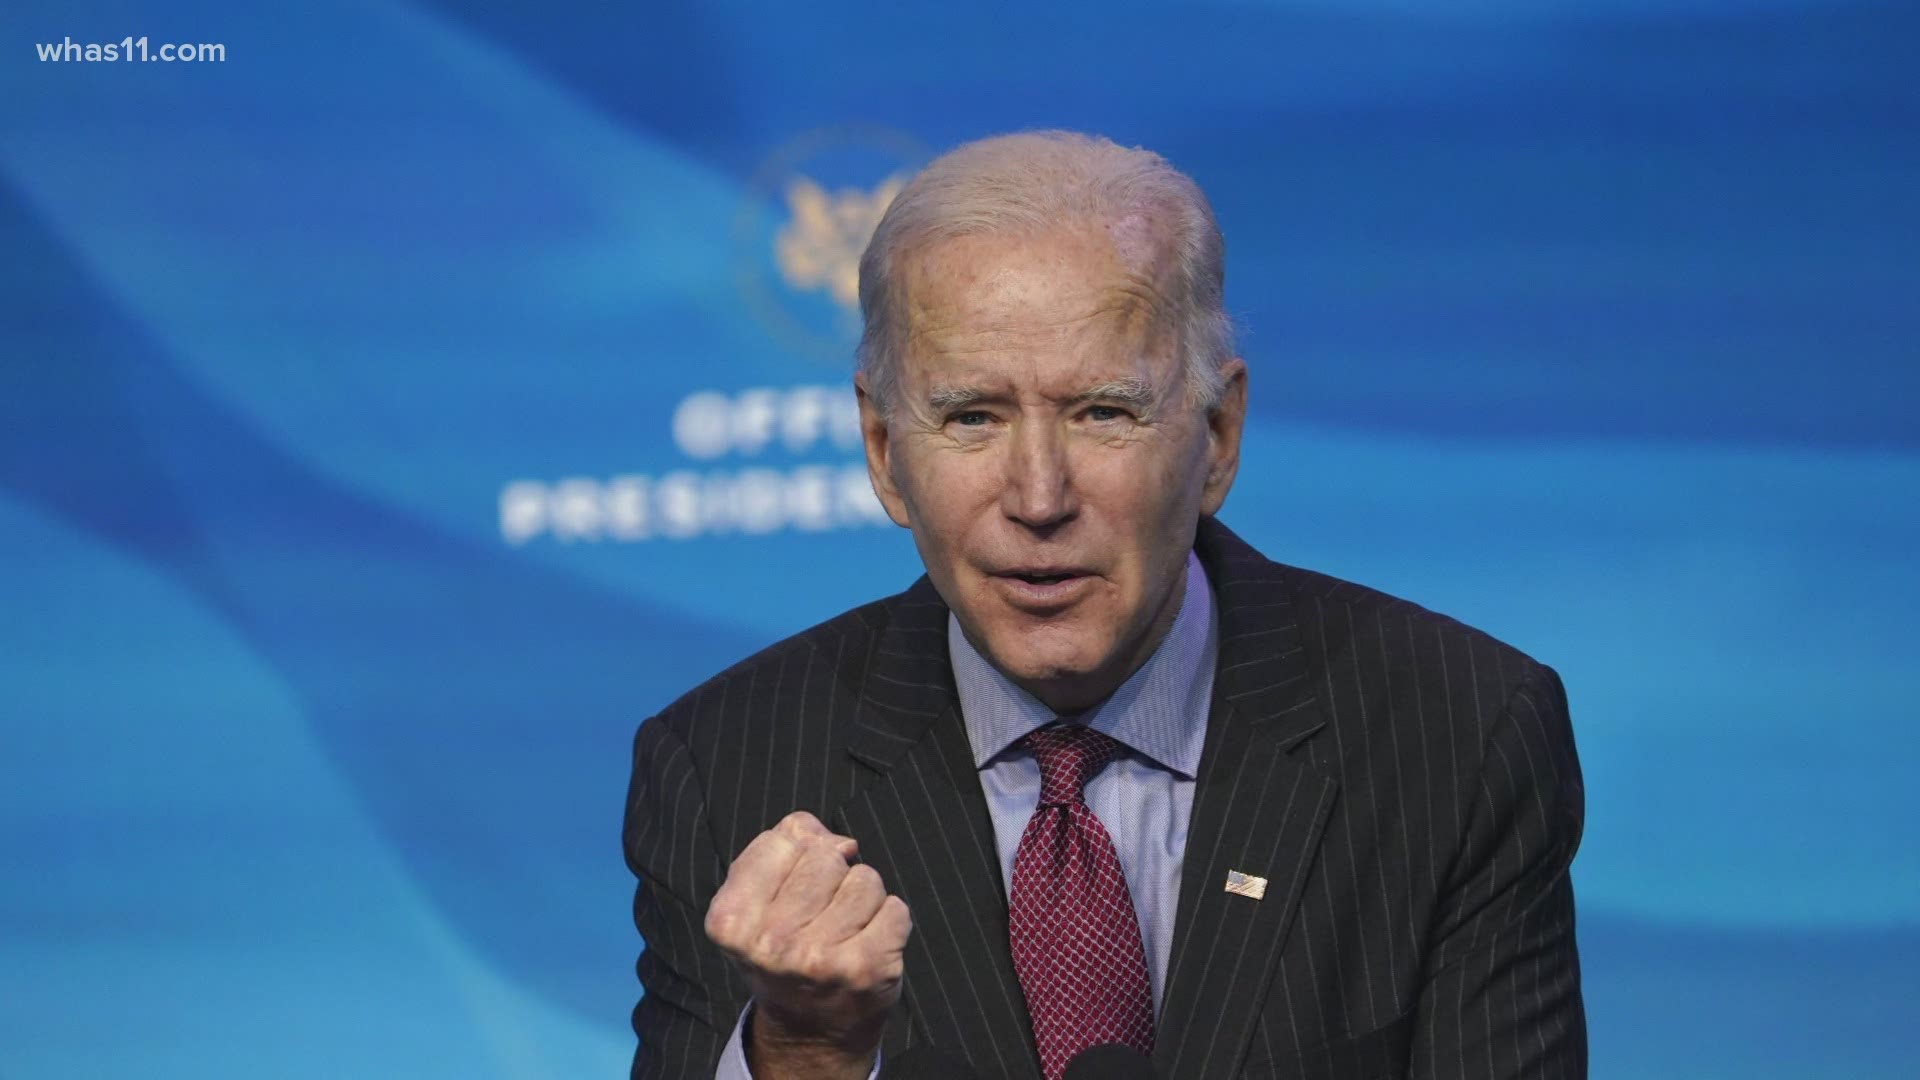 Joe Biden plans to issue several executive orders once he becomes president. How much can he do on his own and what does he need permission to do?